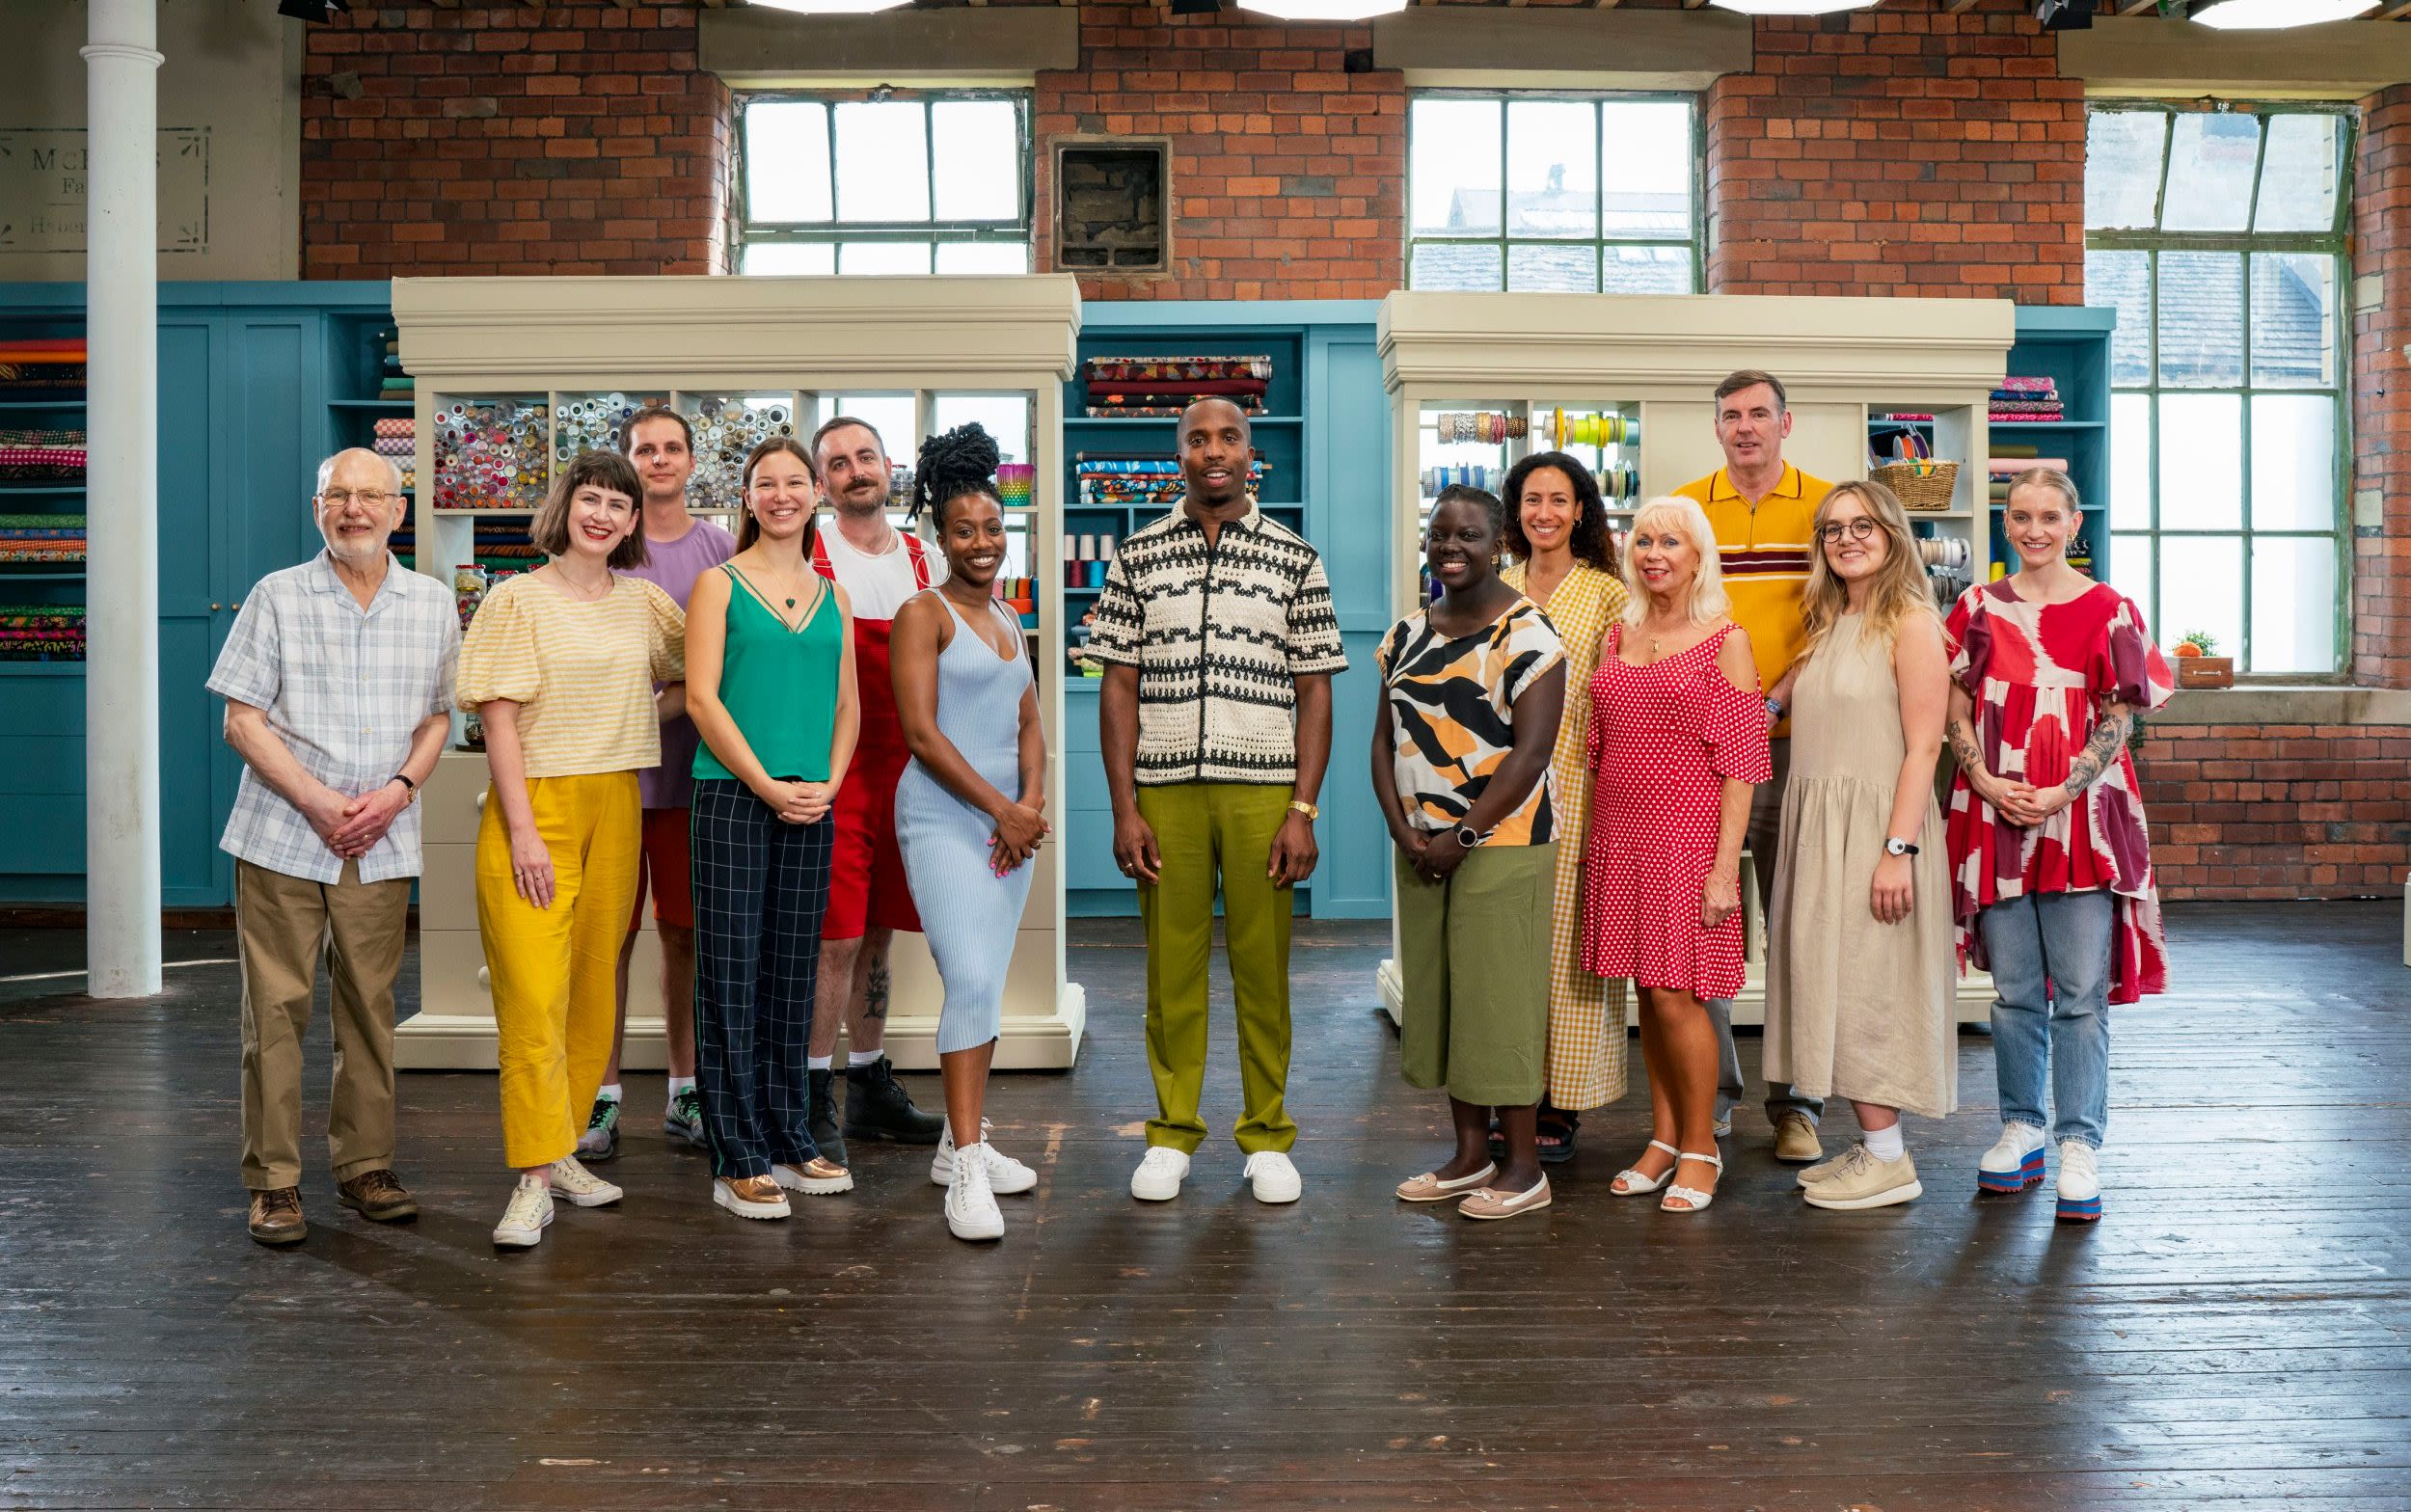 What’s on TV tonight: Imposter: The Great British Sewing Bee, Meet the Richardsons and more